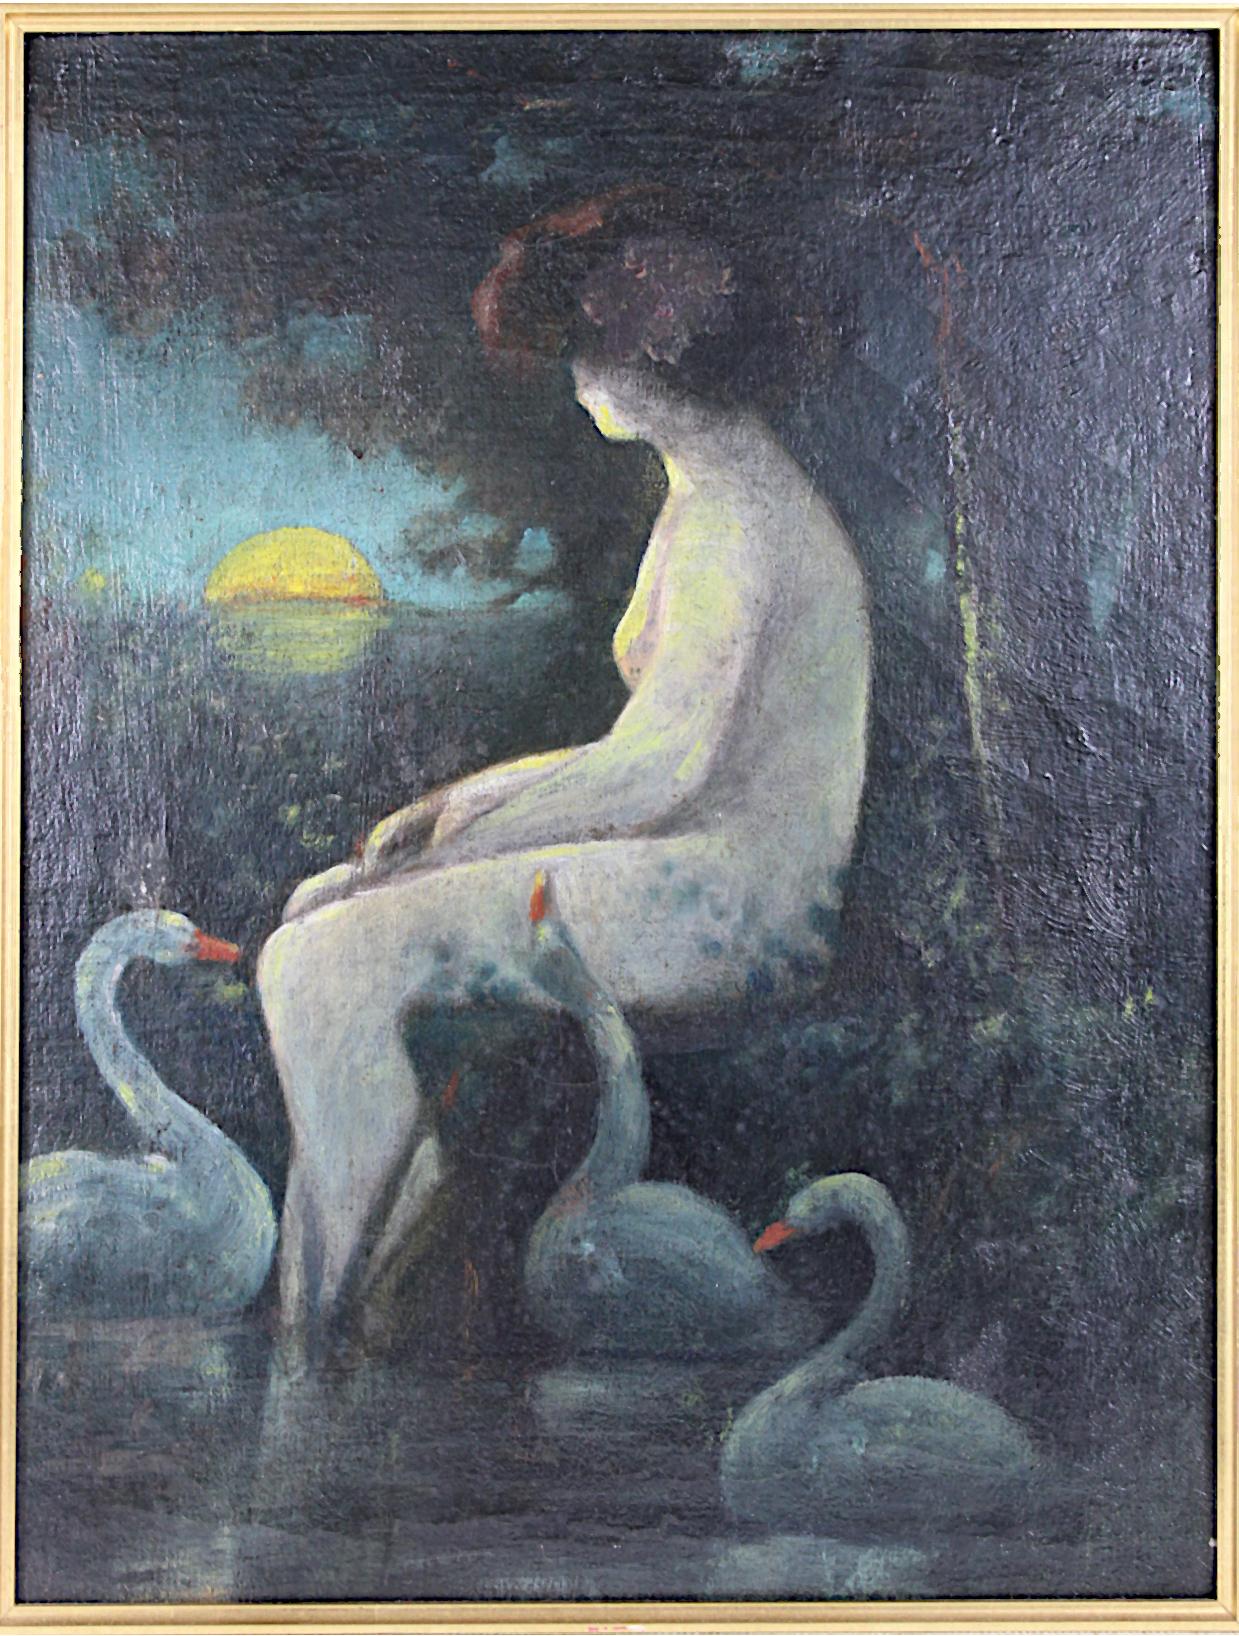 Woman Bathing at Moonlight, Original Oil on Canvas, French Romantic School - Painting by Unknown